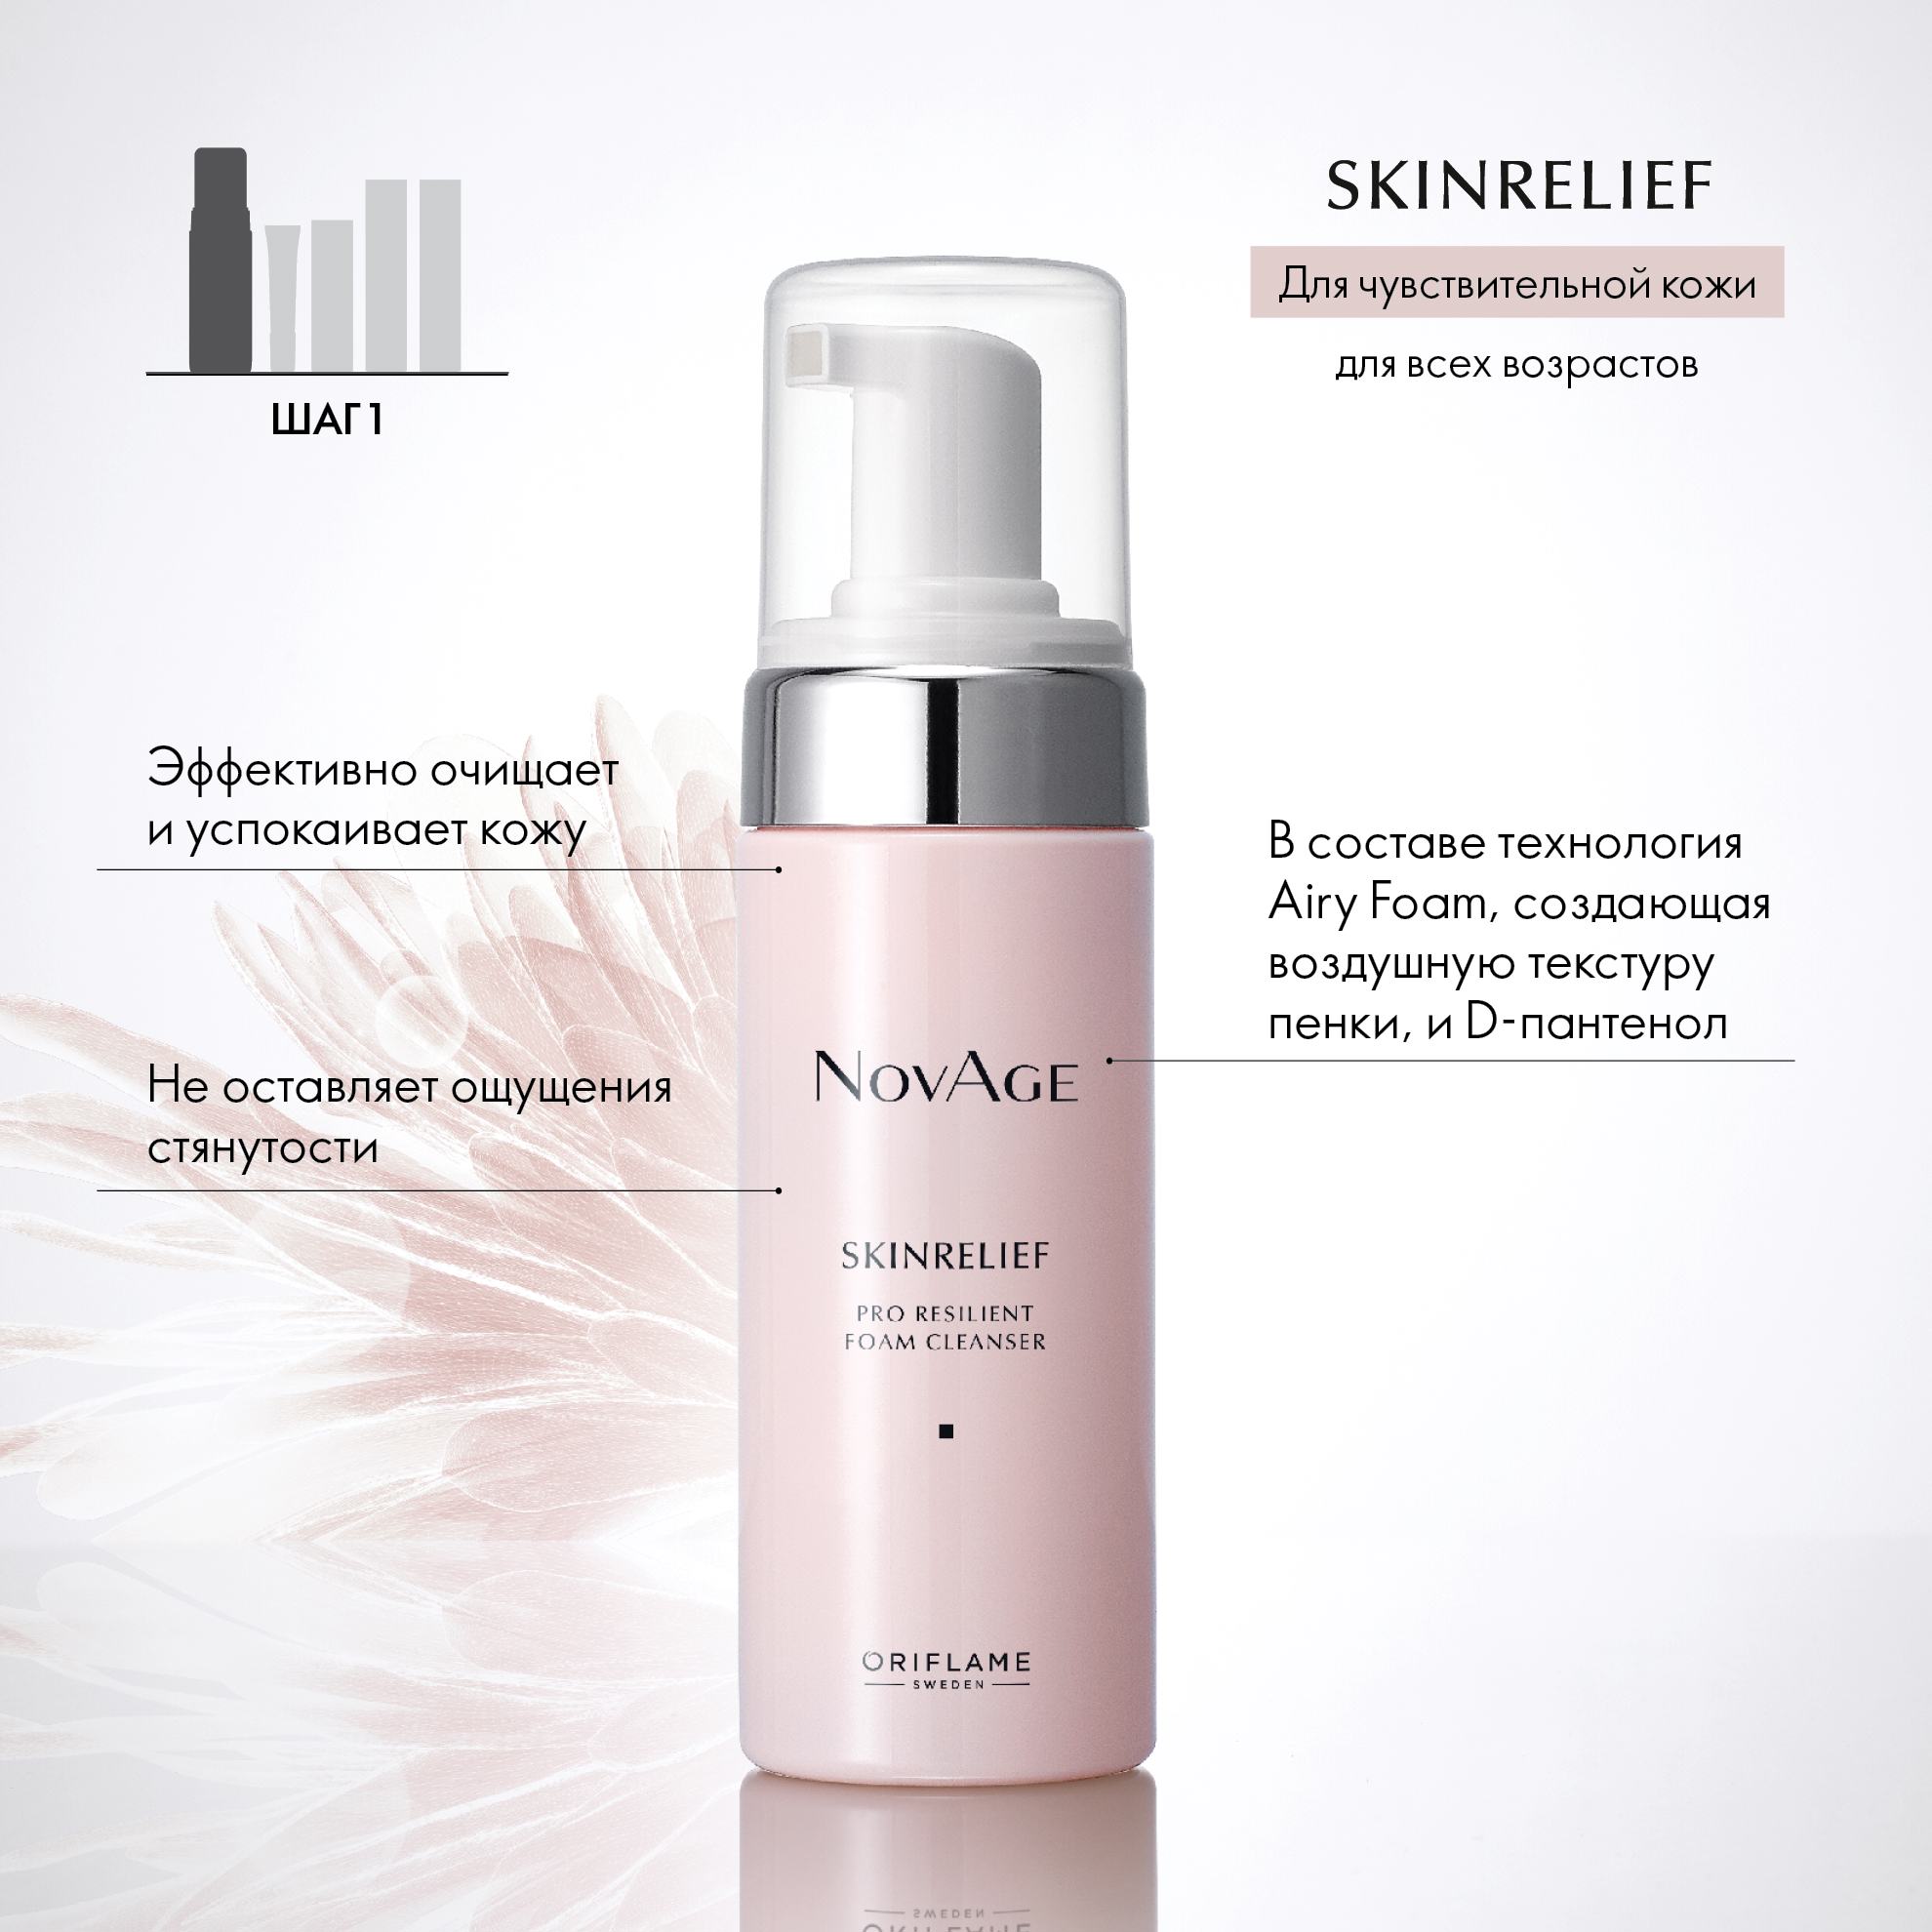 https://media-cdn.oriflame.com/productImage?externalMediaId=product-management-media%2fProducts%2f38382%2fBY%2f38382_3.png&id=15499388&version=1